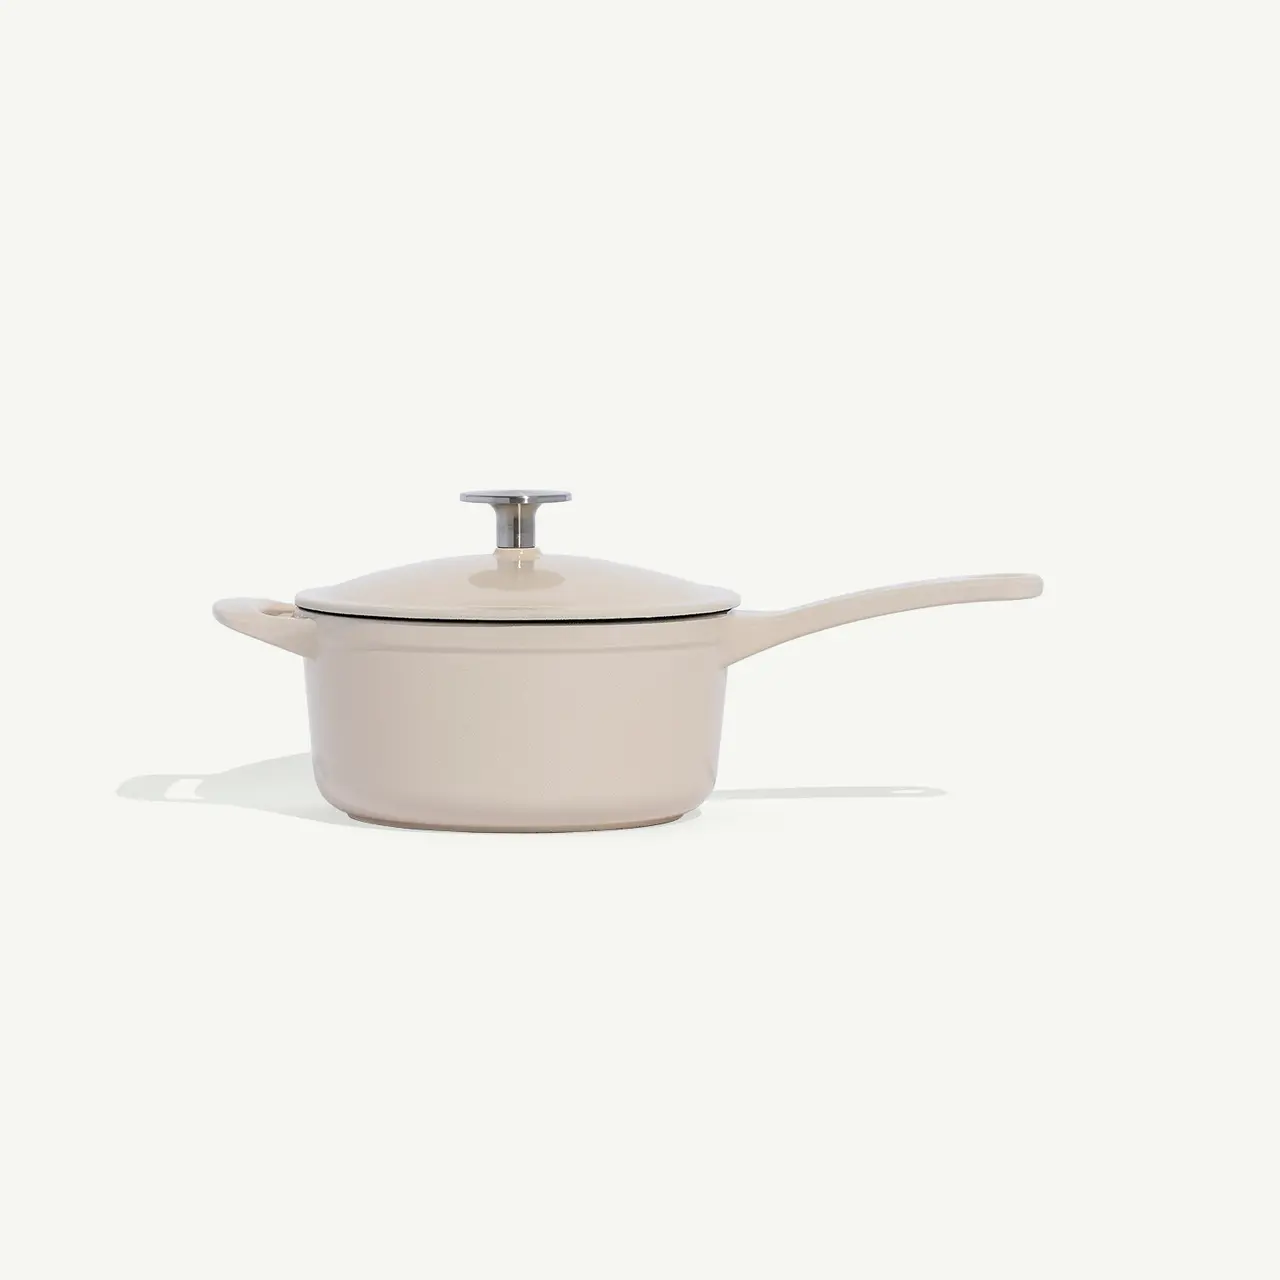 A beige saucepan with a lid is centered against a white background.